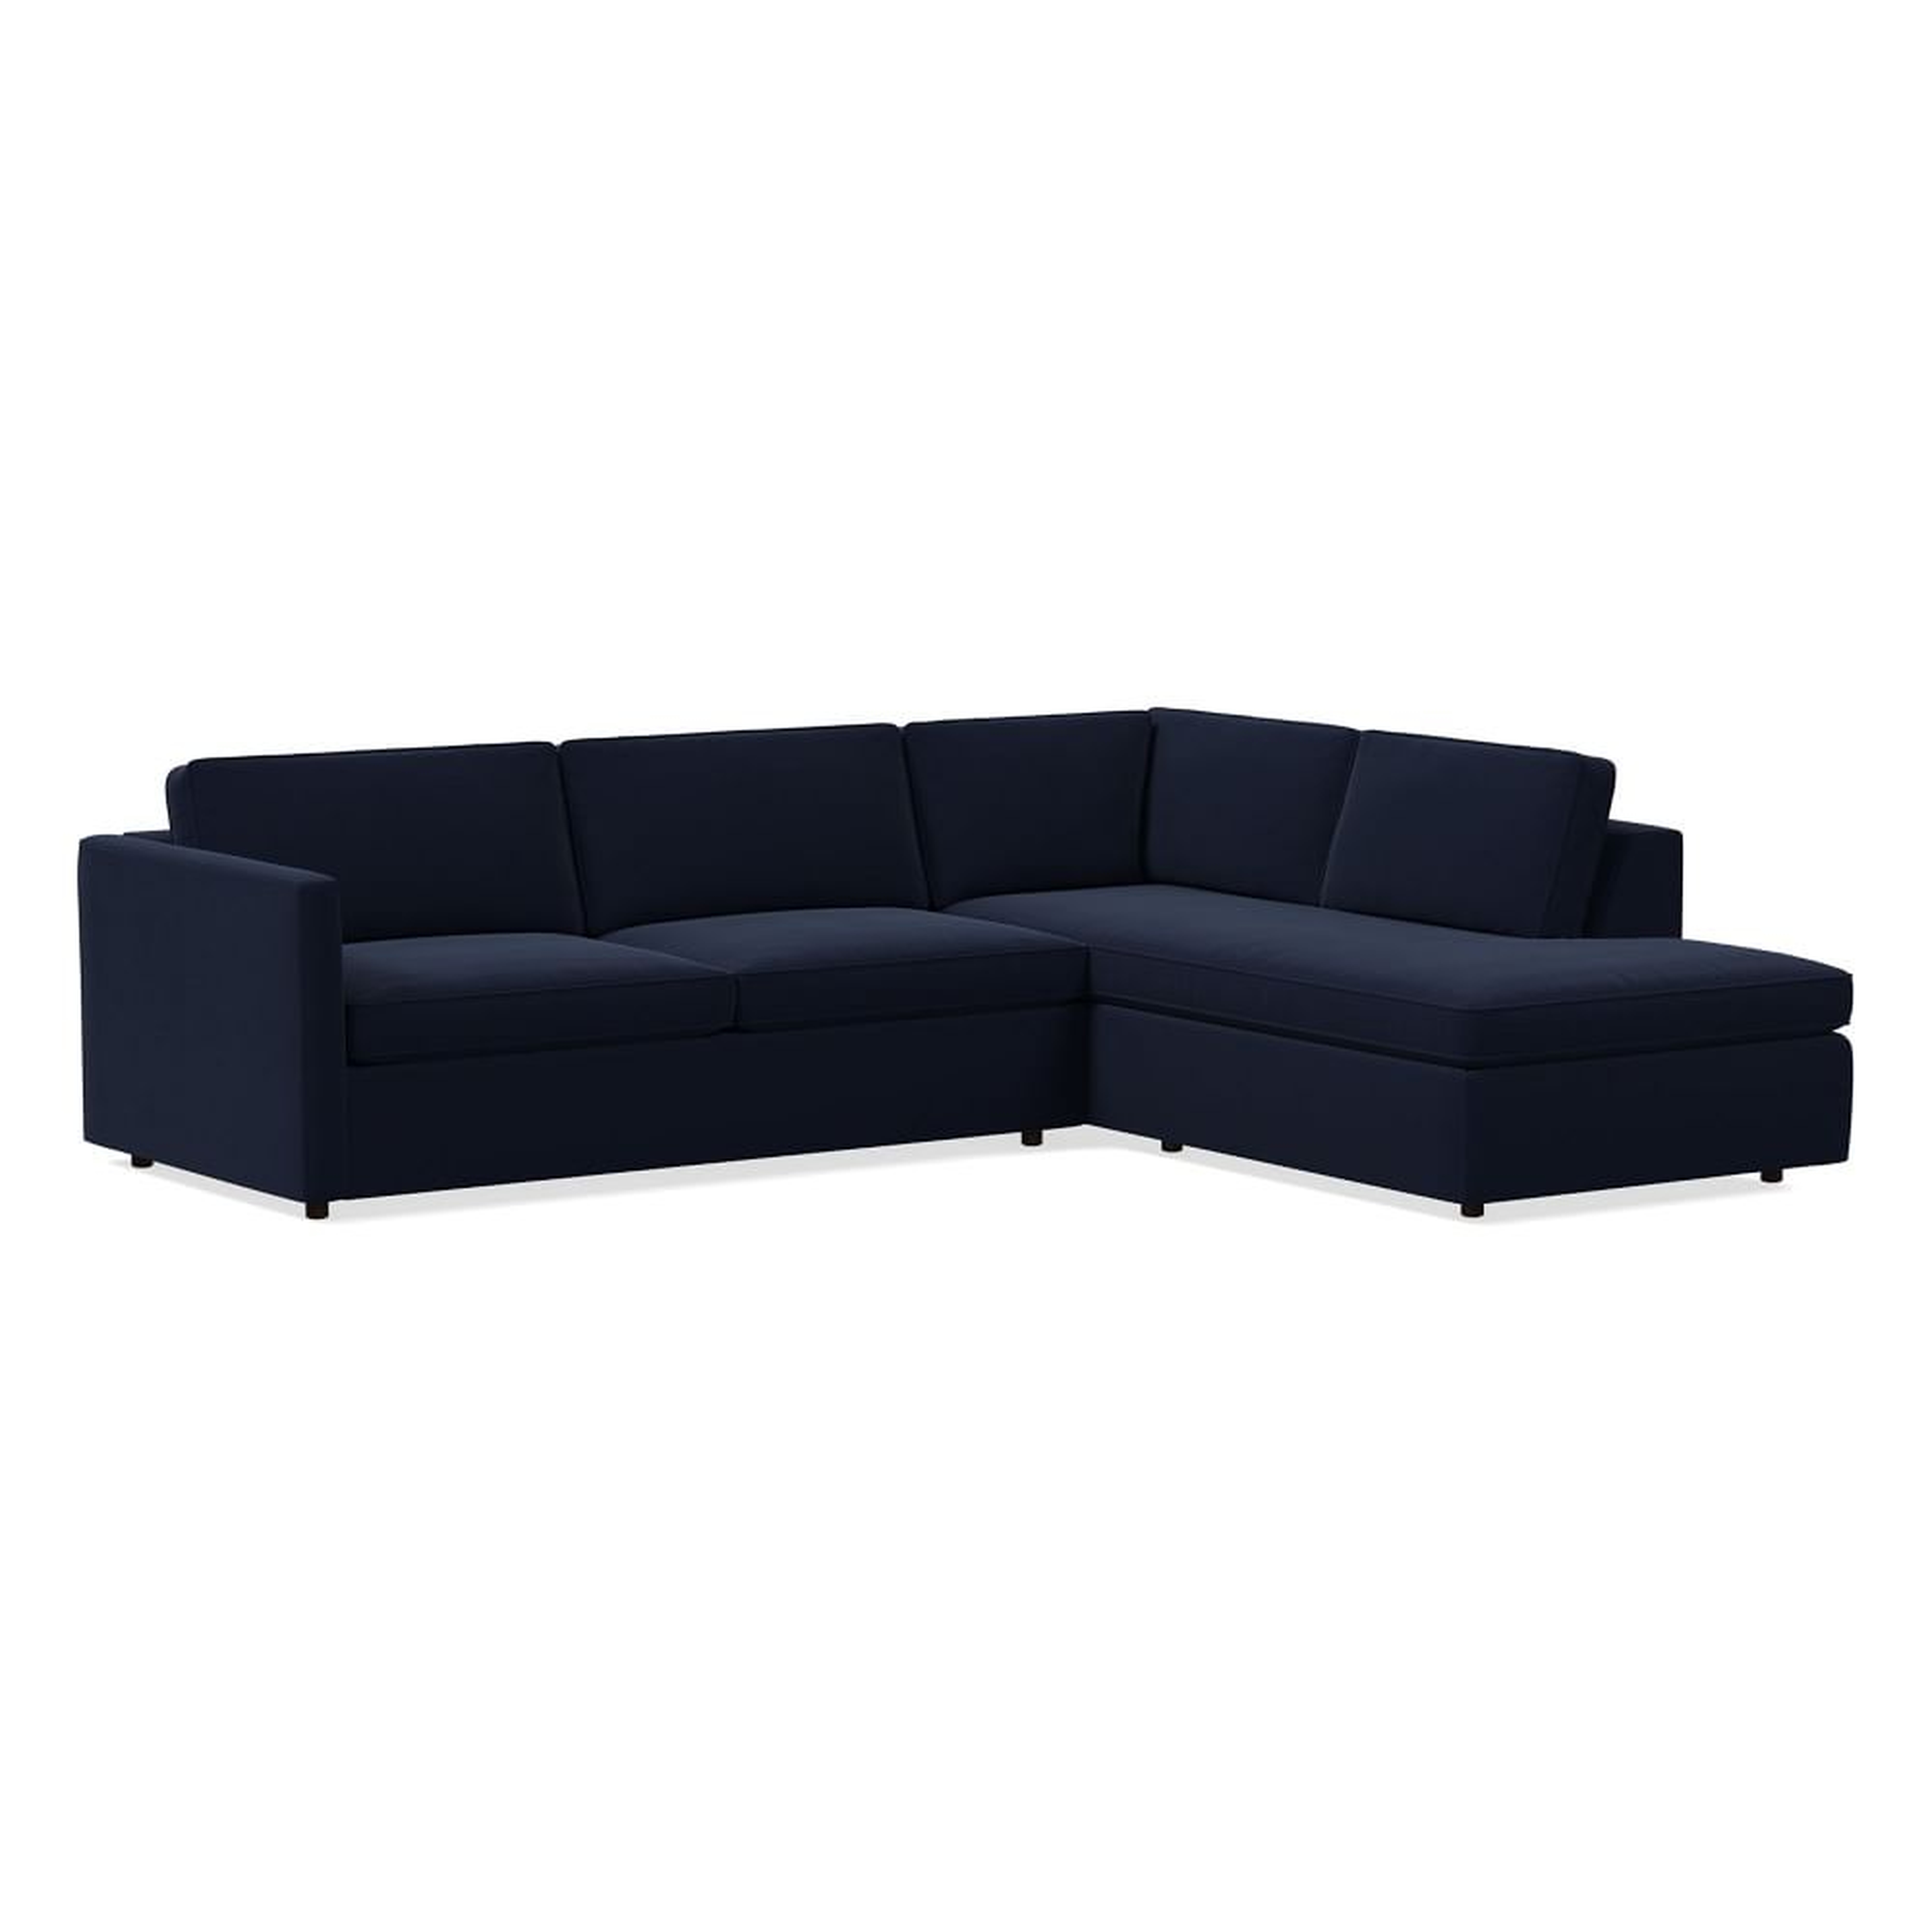 Harris 112" Right Multi-Seat Sleeper Sectional w/ Bumper Chaise, Distressed Velvet, Ink Blue - West Elm